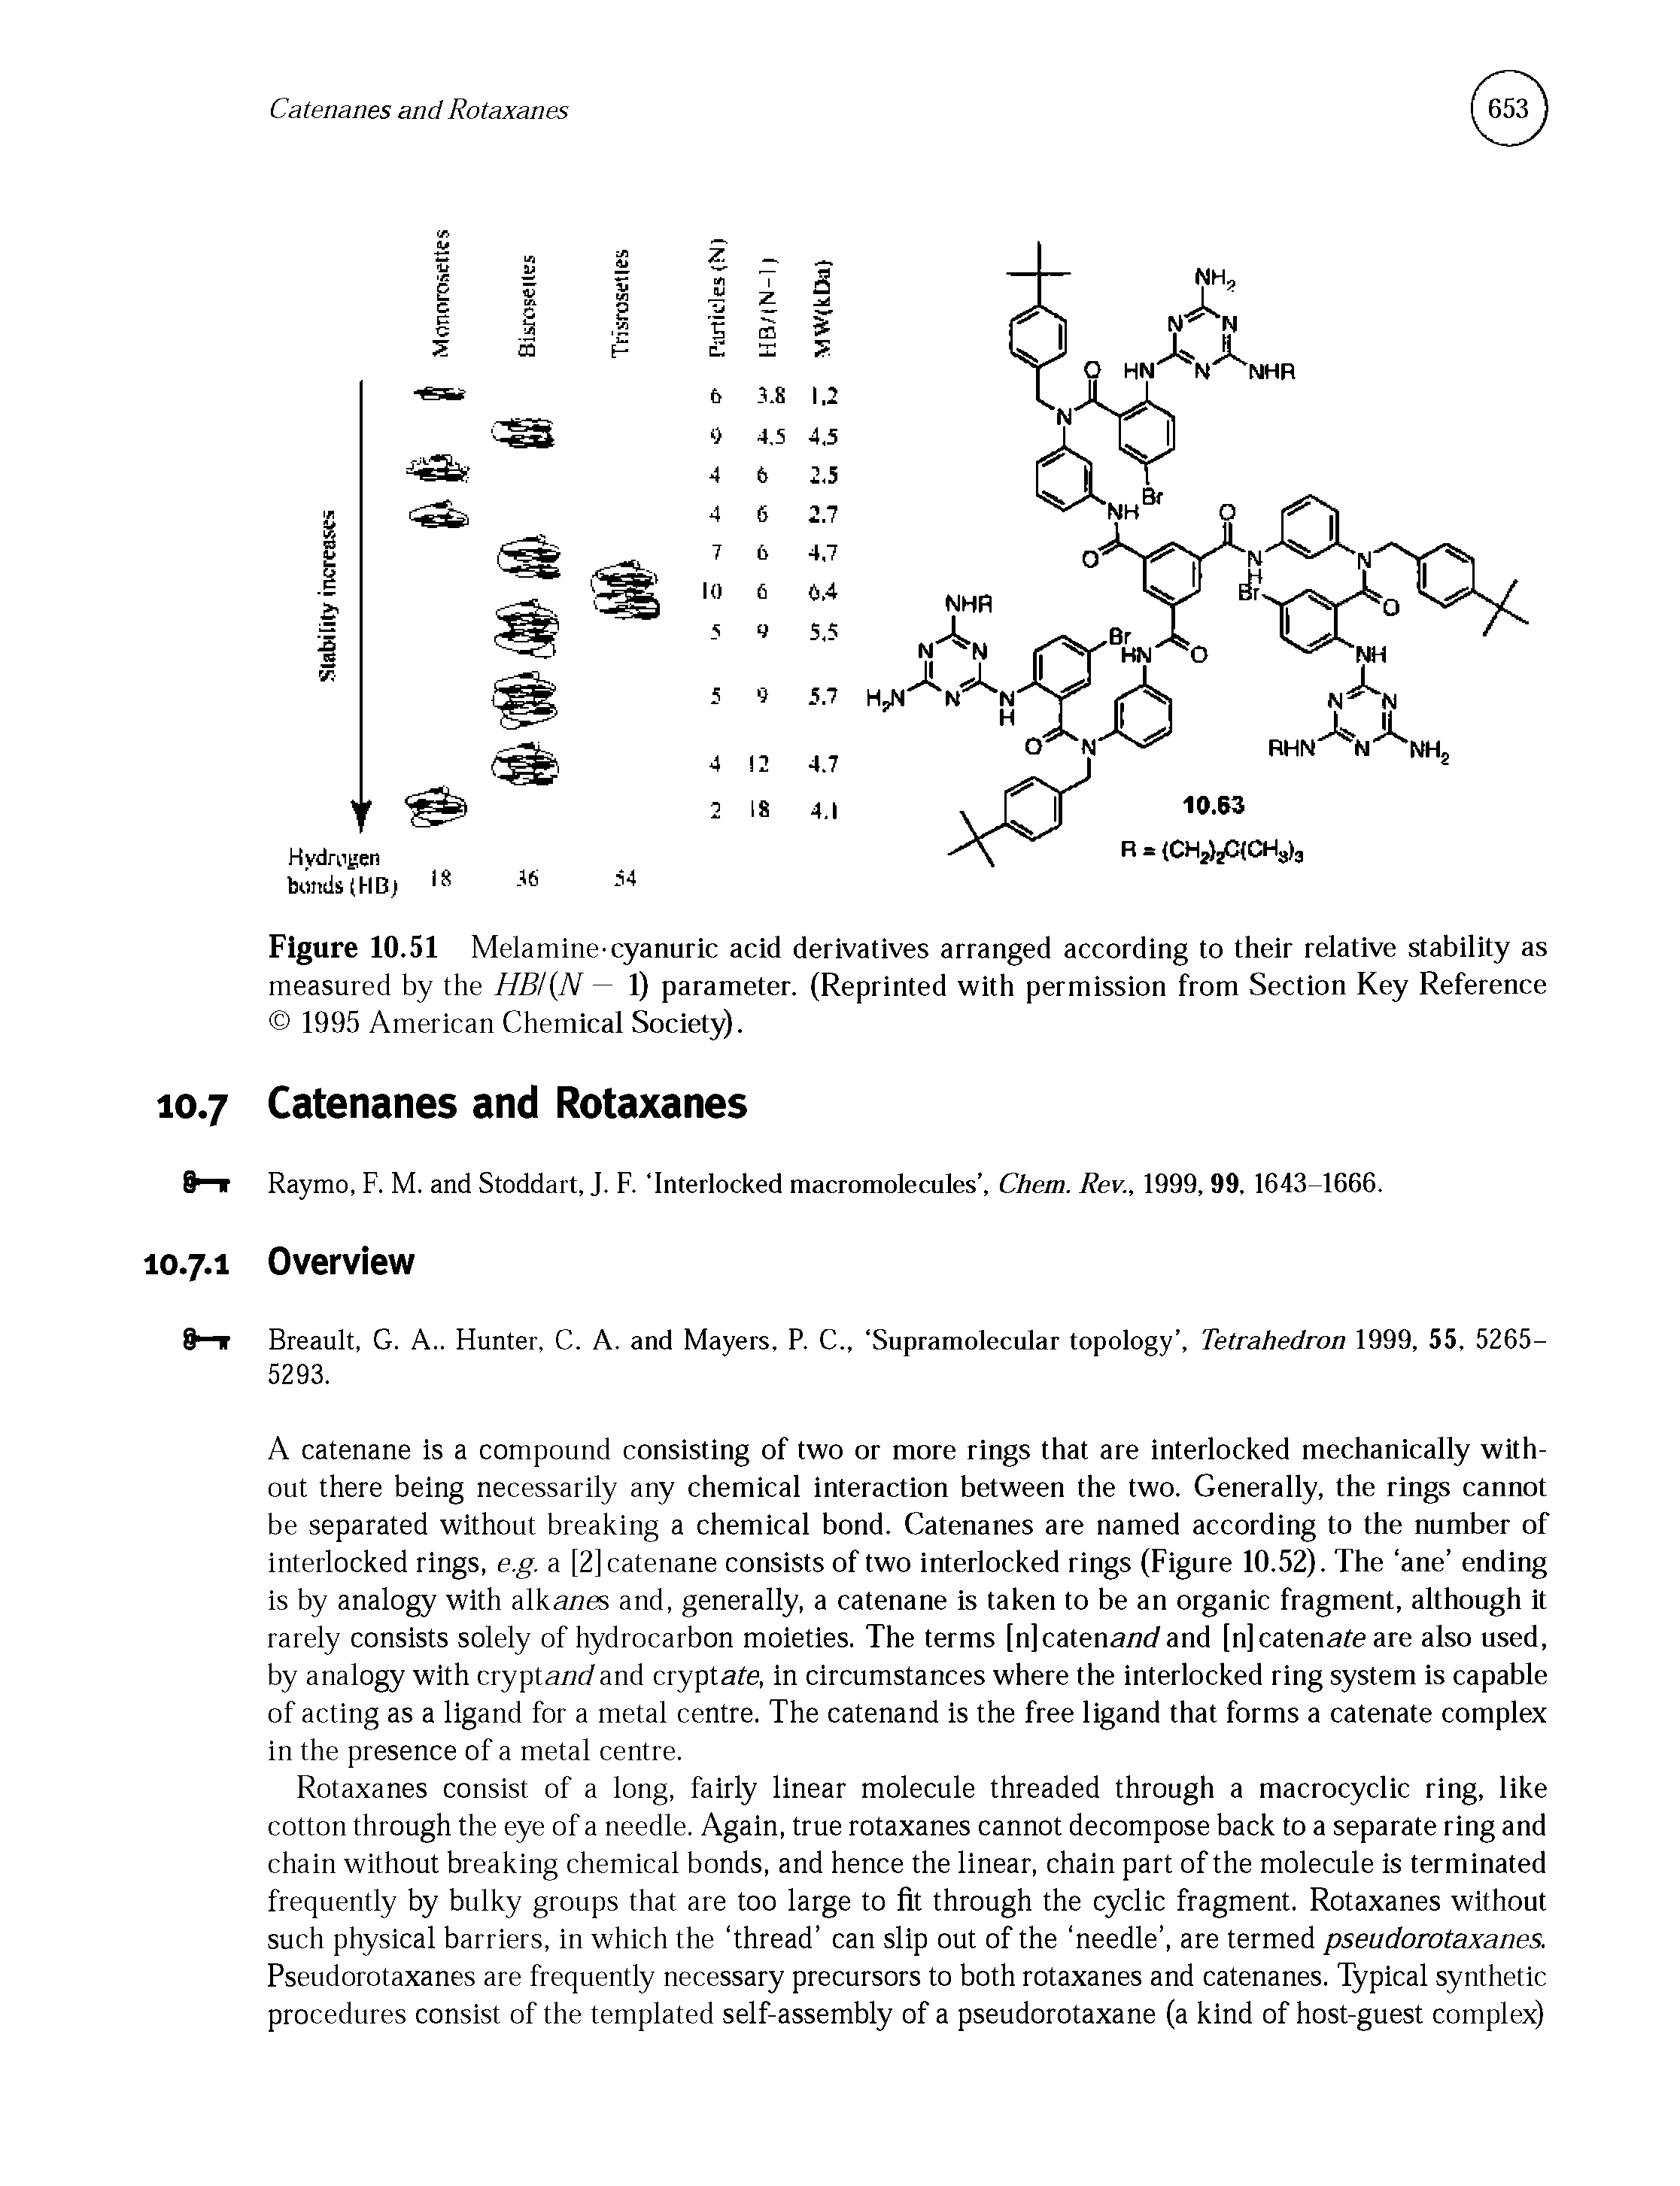 Figure 10.51 Melamine-cyanuric acid derivatives arranged according to their relative stability as measured by the HBI(N — 1) parameter. (Reprinted with permission from Section Key Reference 1995 American Chemical Society).